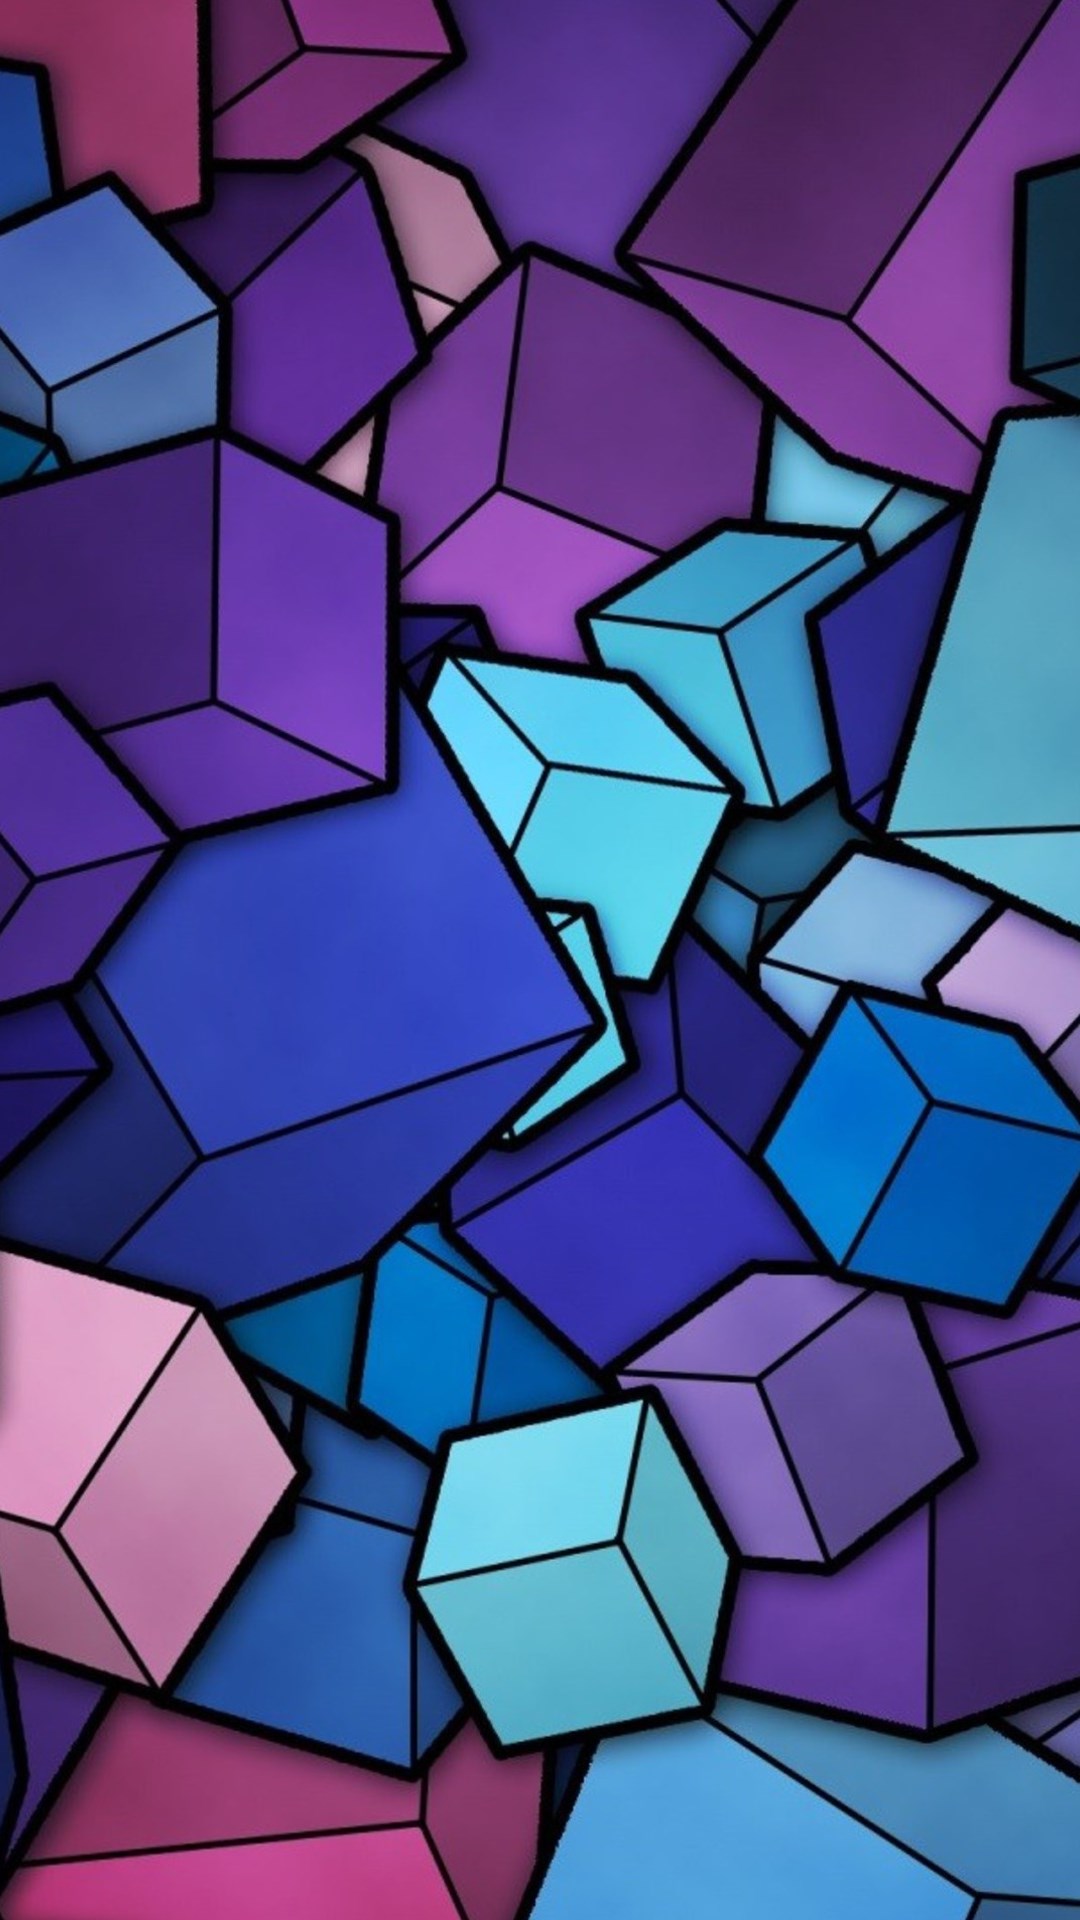 Abstract Blue Cyan Purple Cubes iPhone 6 Plus HD Wallpaper